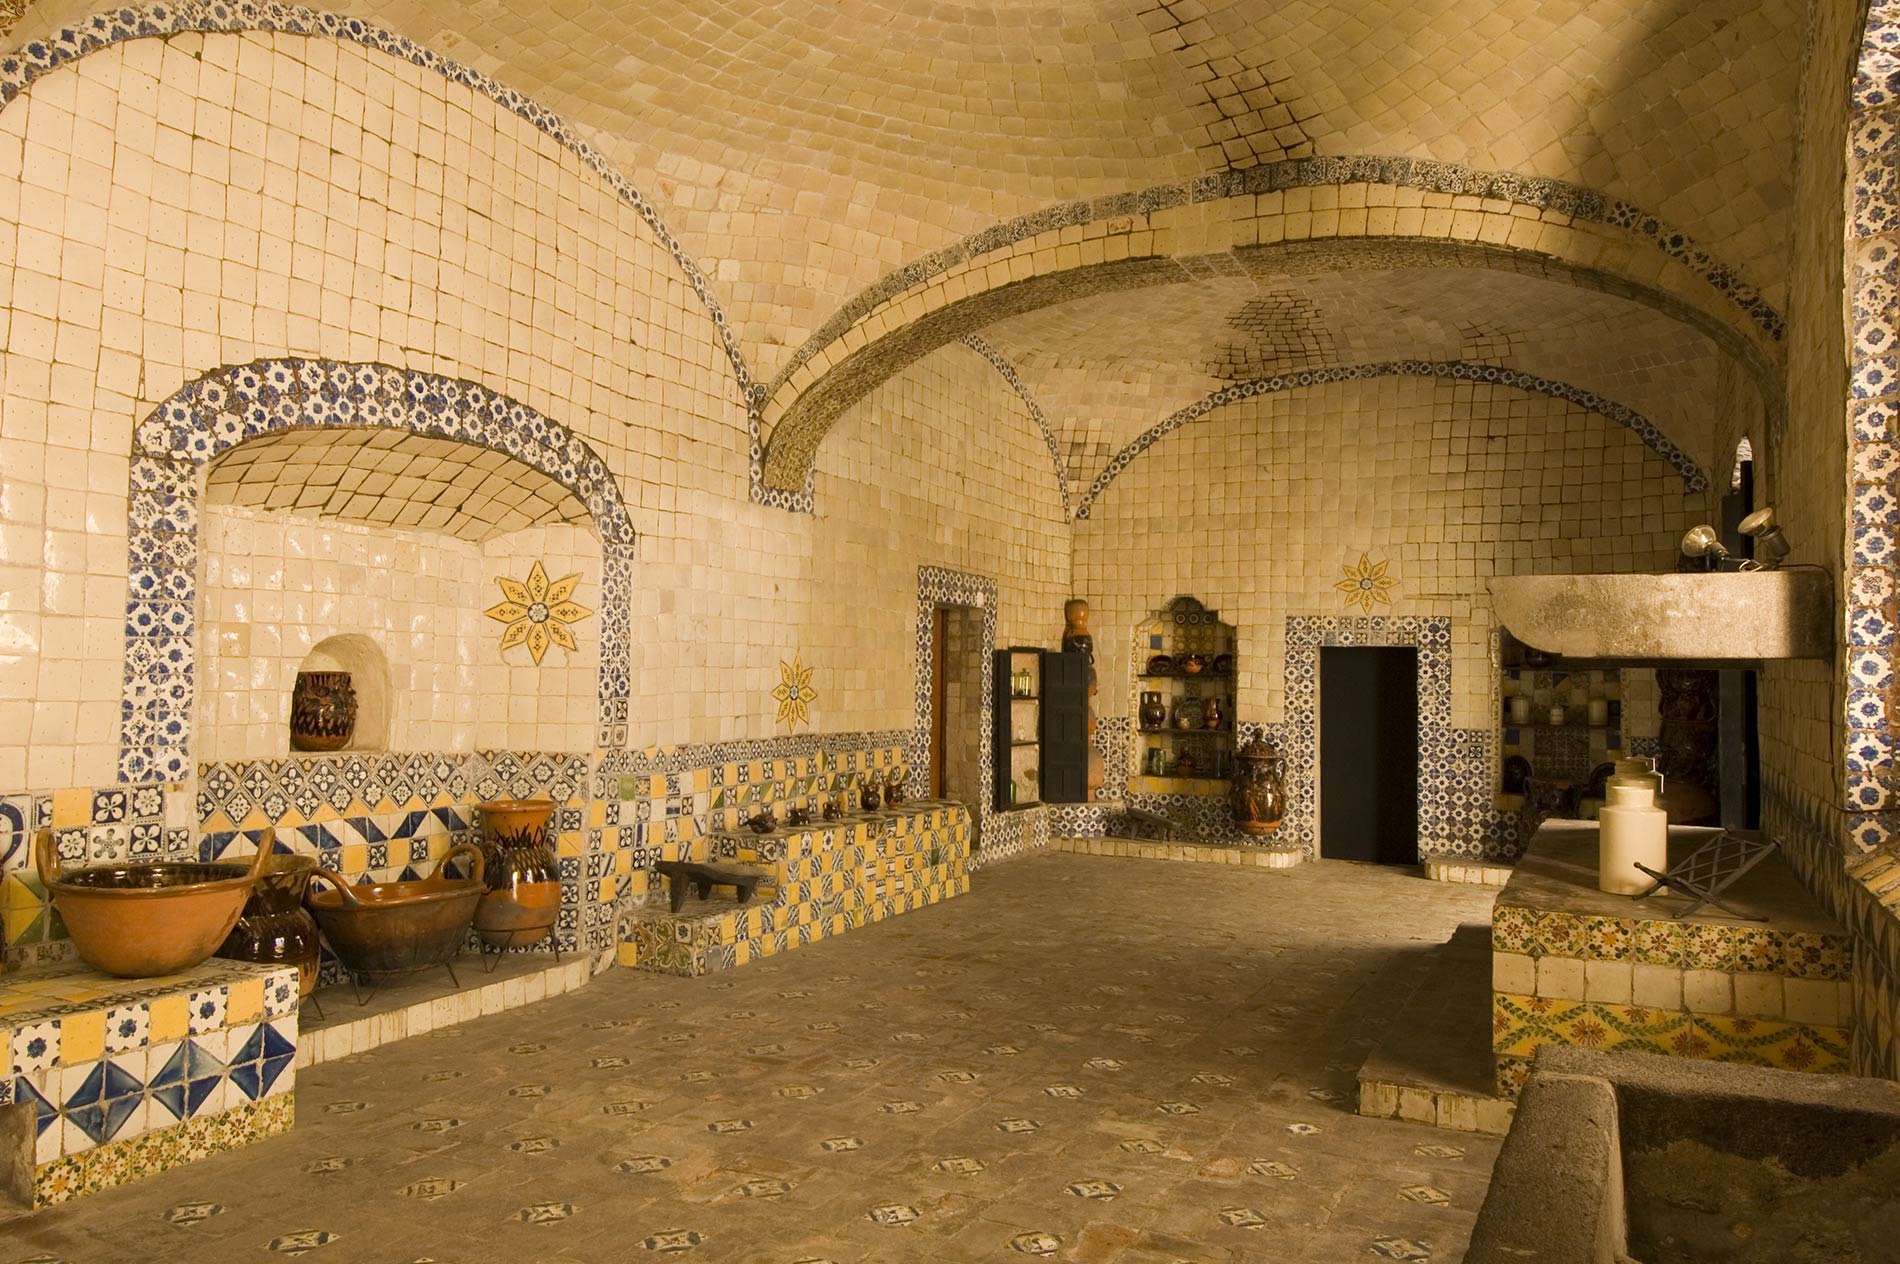 Kitchen of the Convent of Santa Rosa